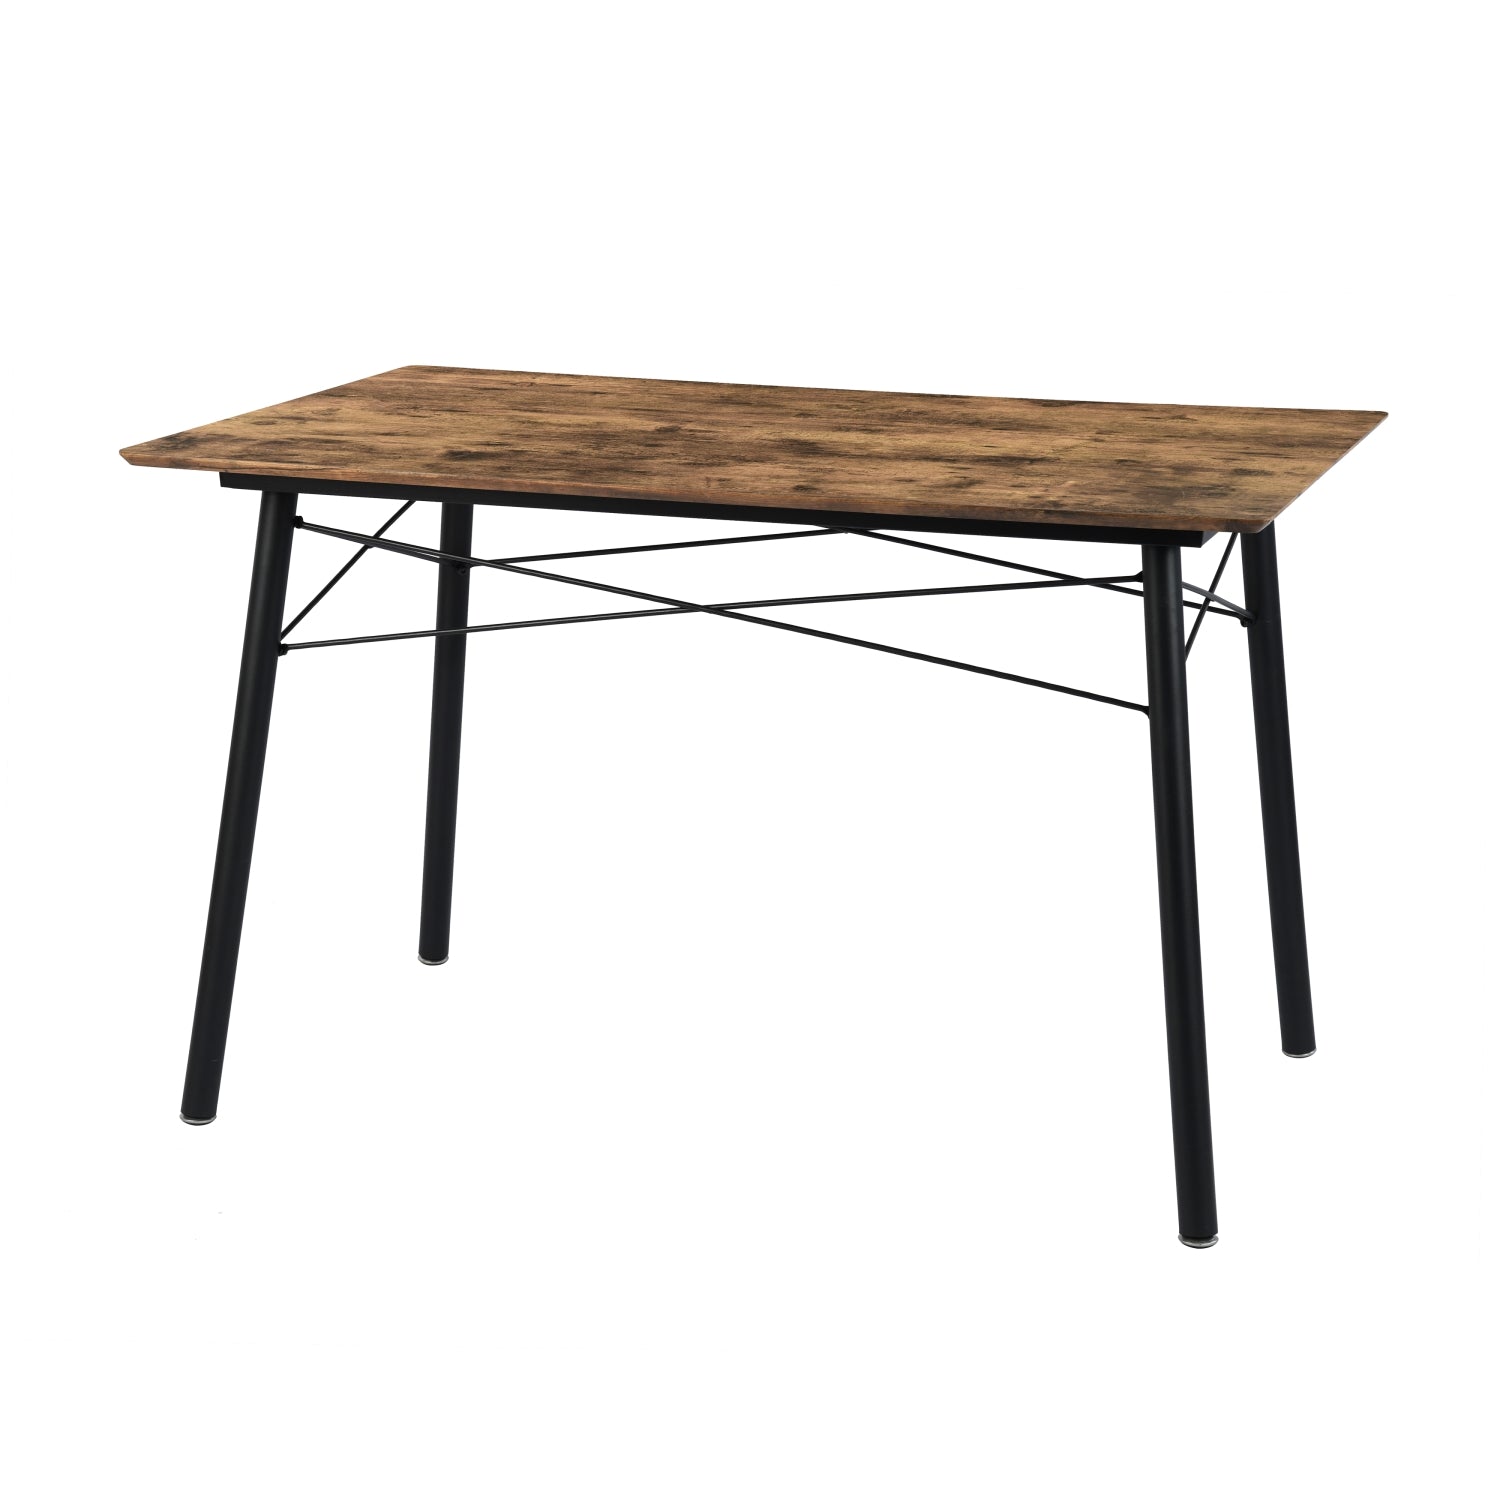 London Wooden Top Dining Table